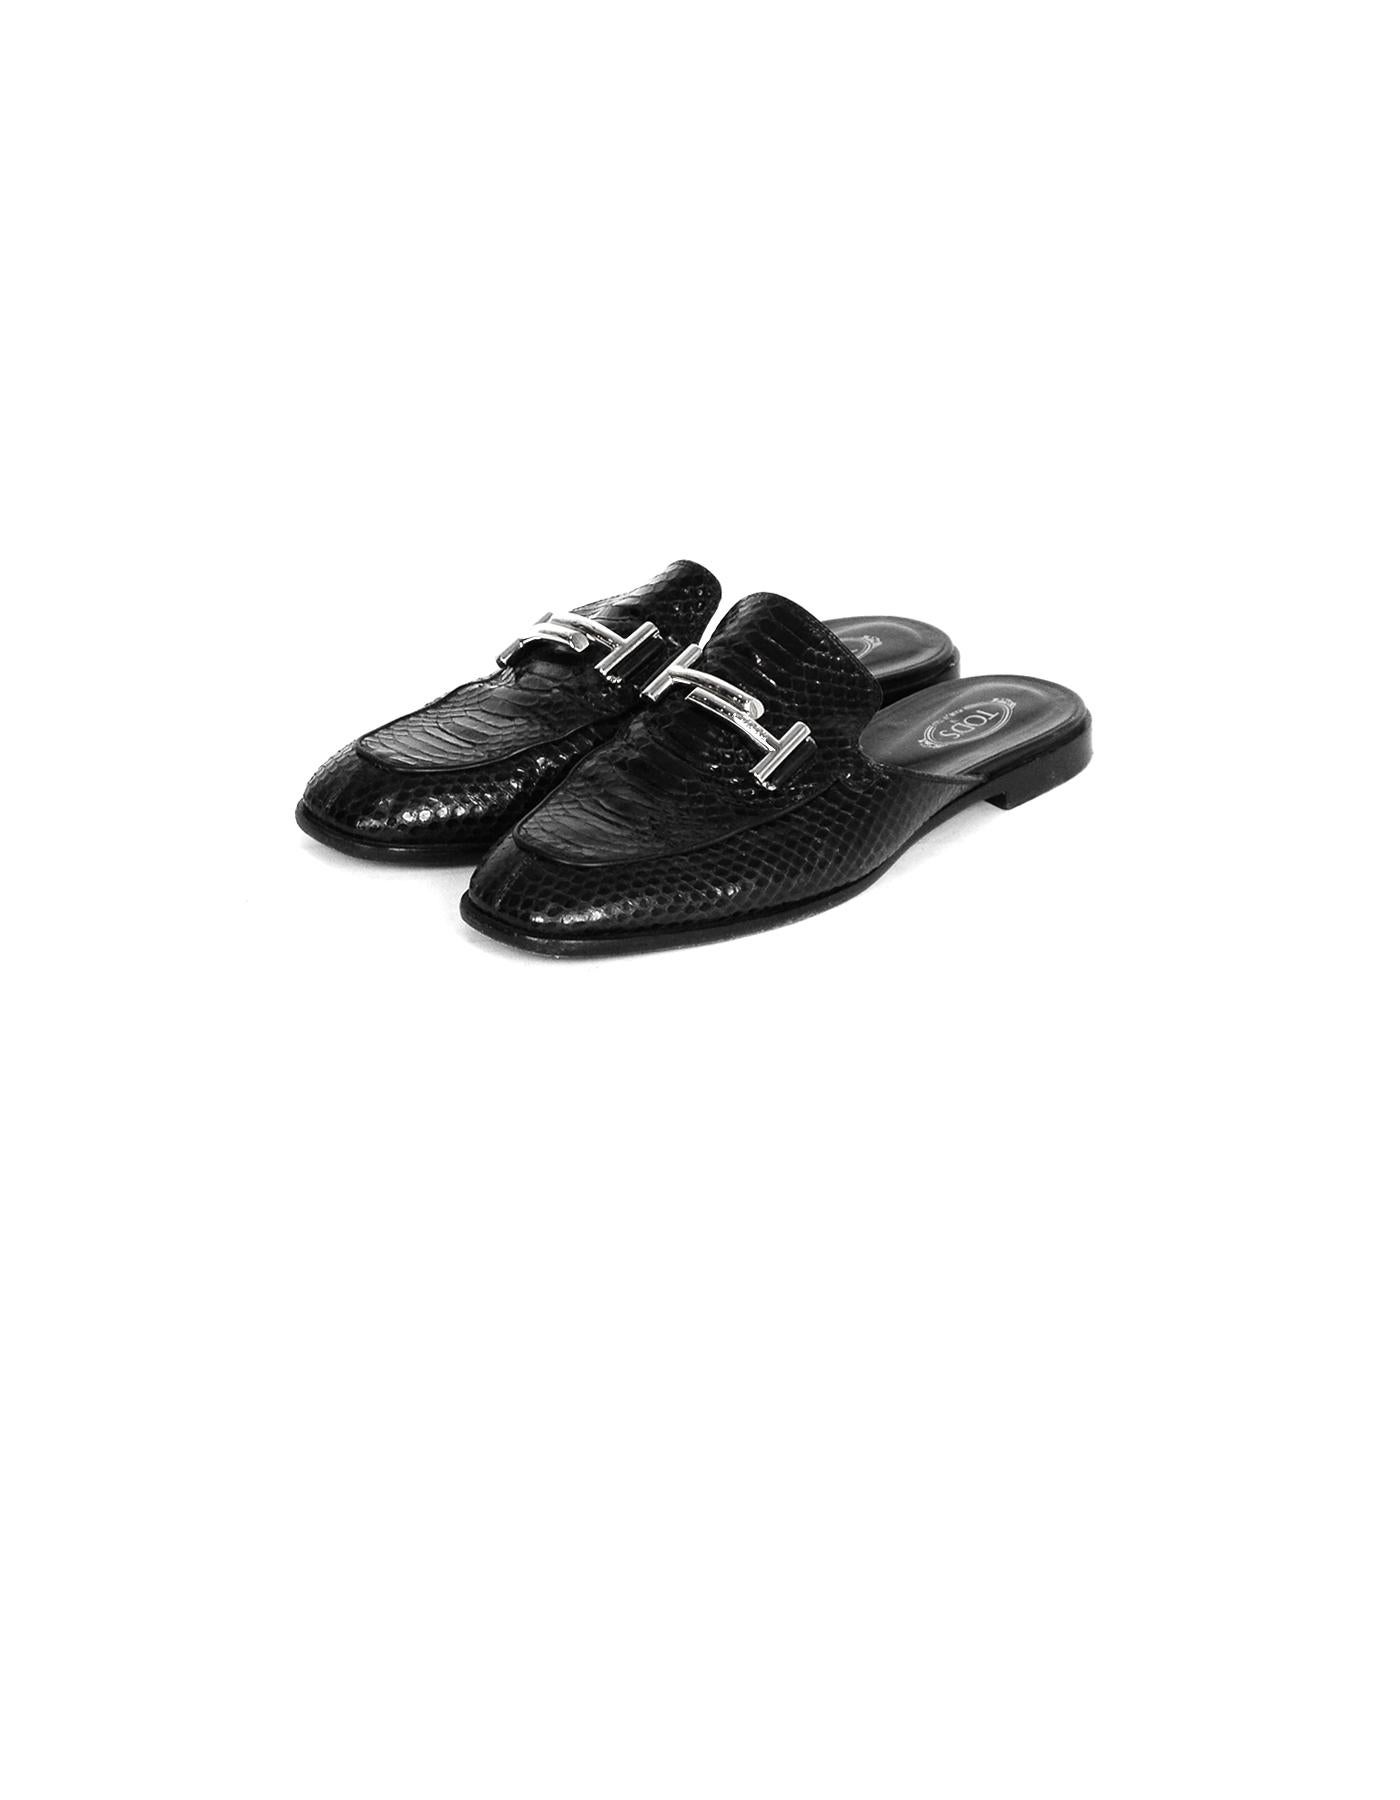 Tod's Black Snakeskin Double T Mules sz 40

Made In: Italy
Color: Black
Hardware: Silvertone
Materials: Snakeskin
Closure/Opening: Slip-on
Overall Condition: Very good pre-owned condition, with the exception of wear on the soles and the heels, and